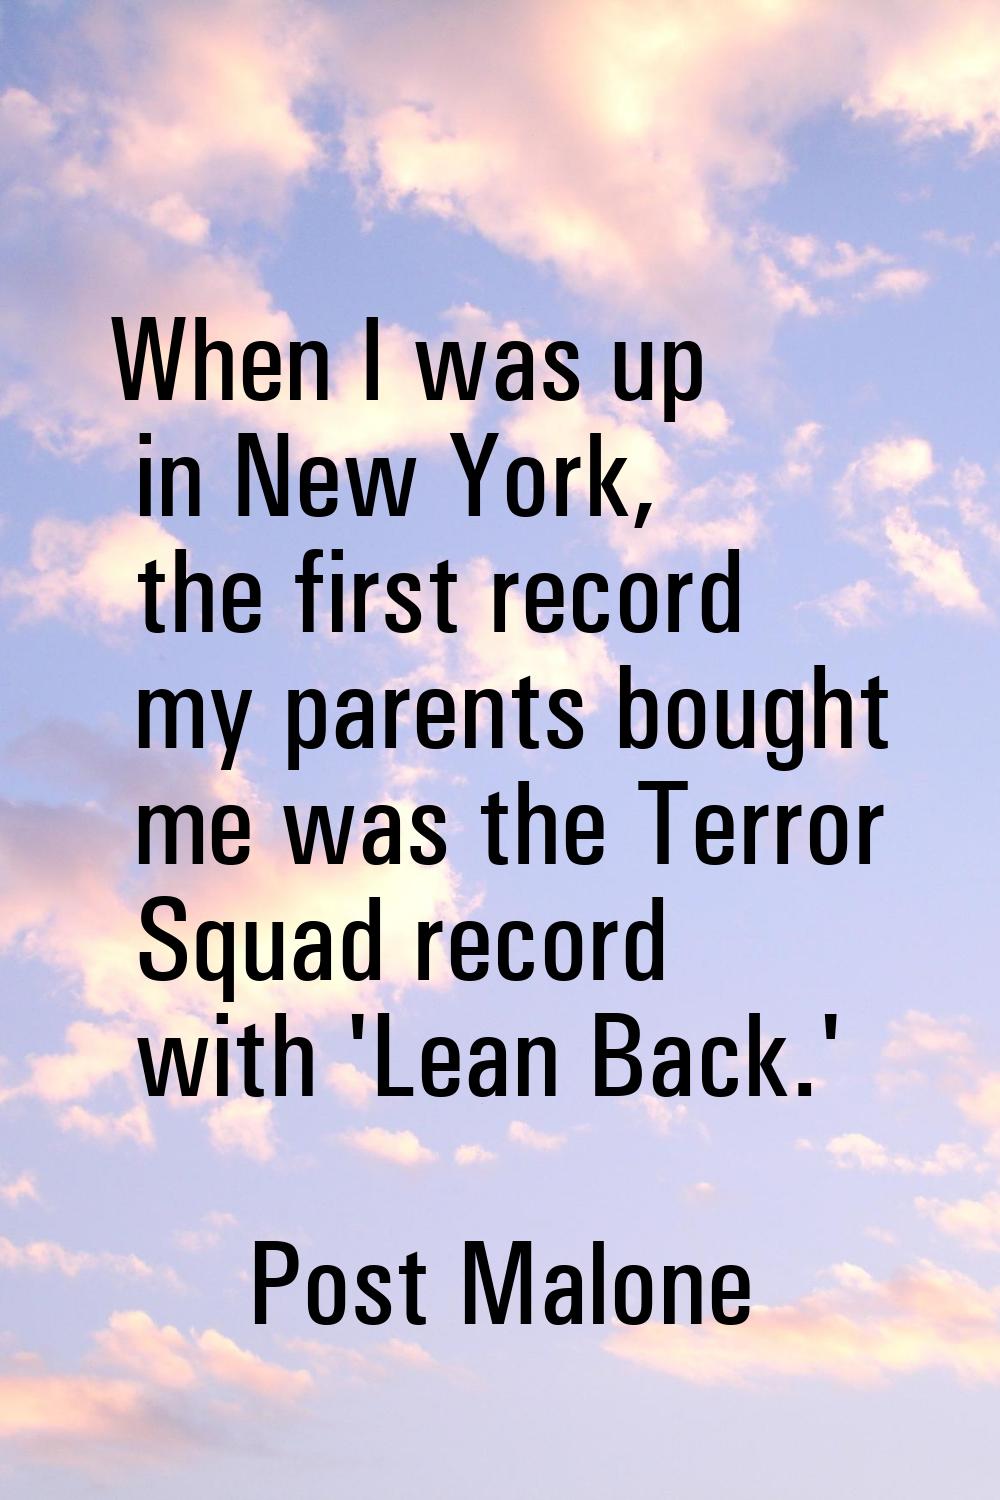 When I was up in New York, the first record my parents bought me was the Terror Squad record with '